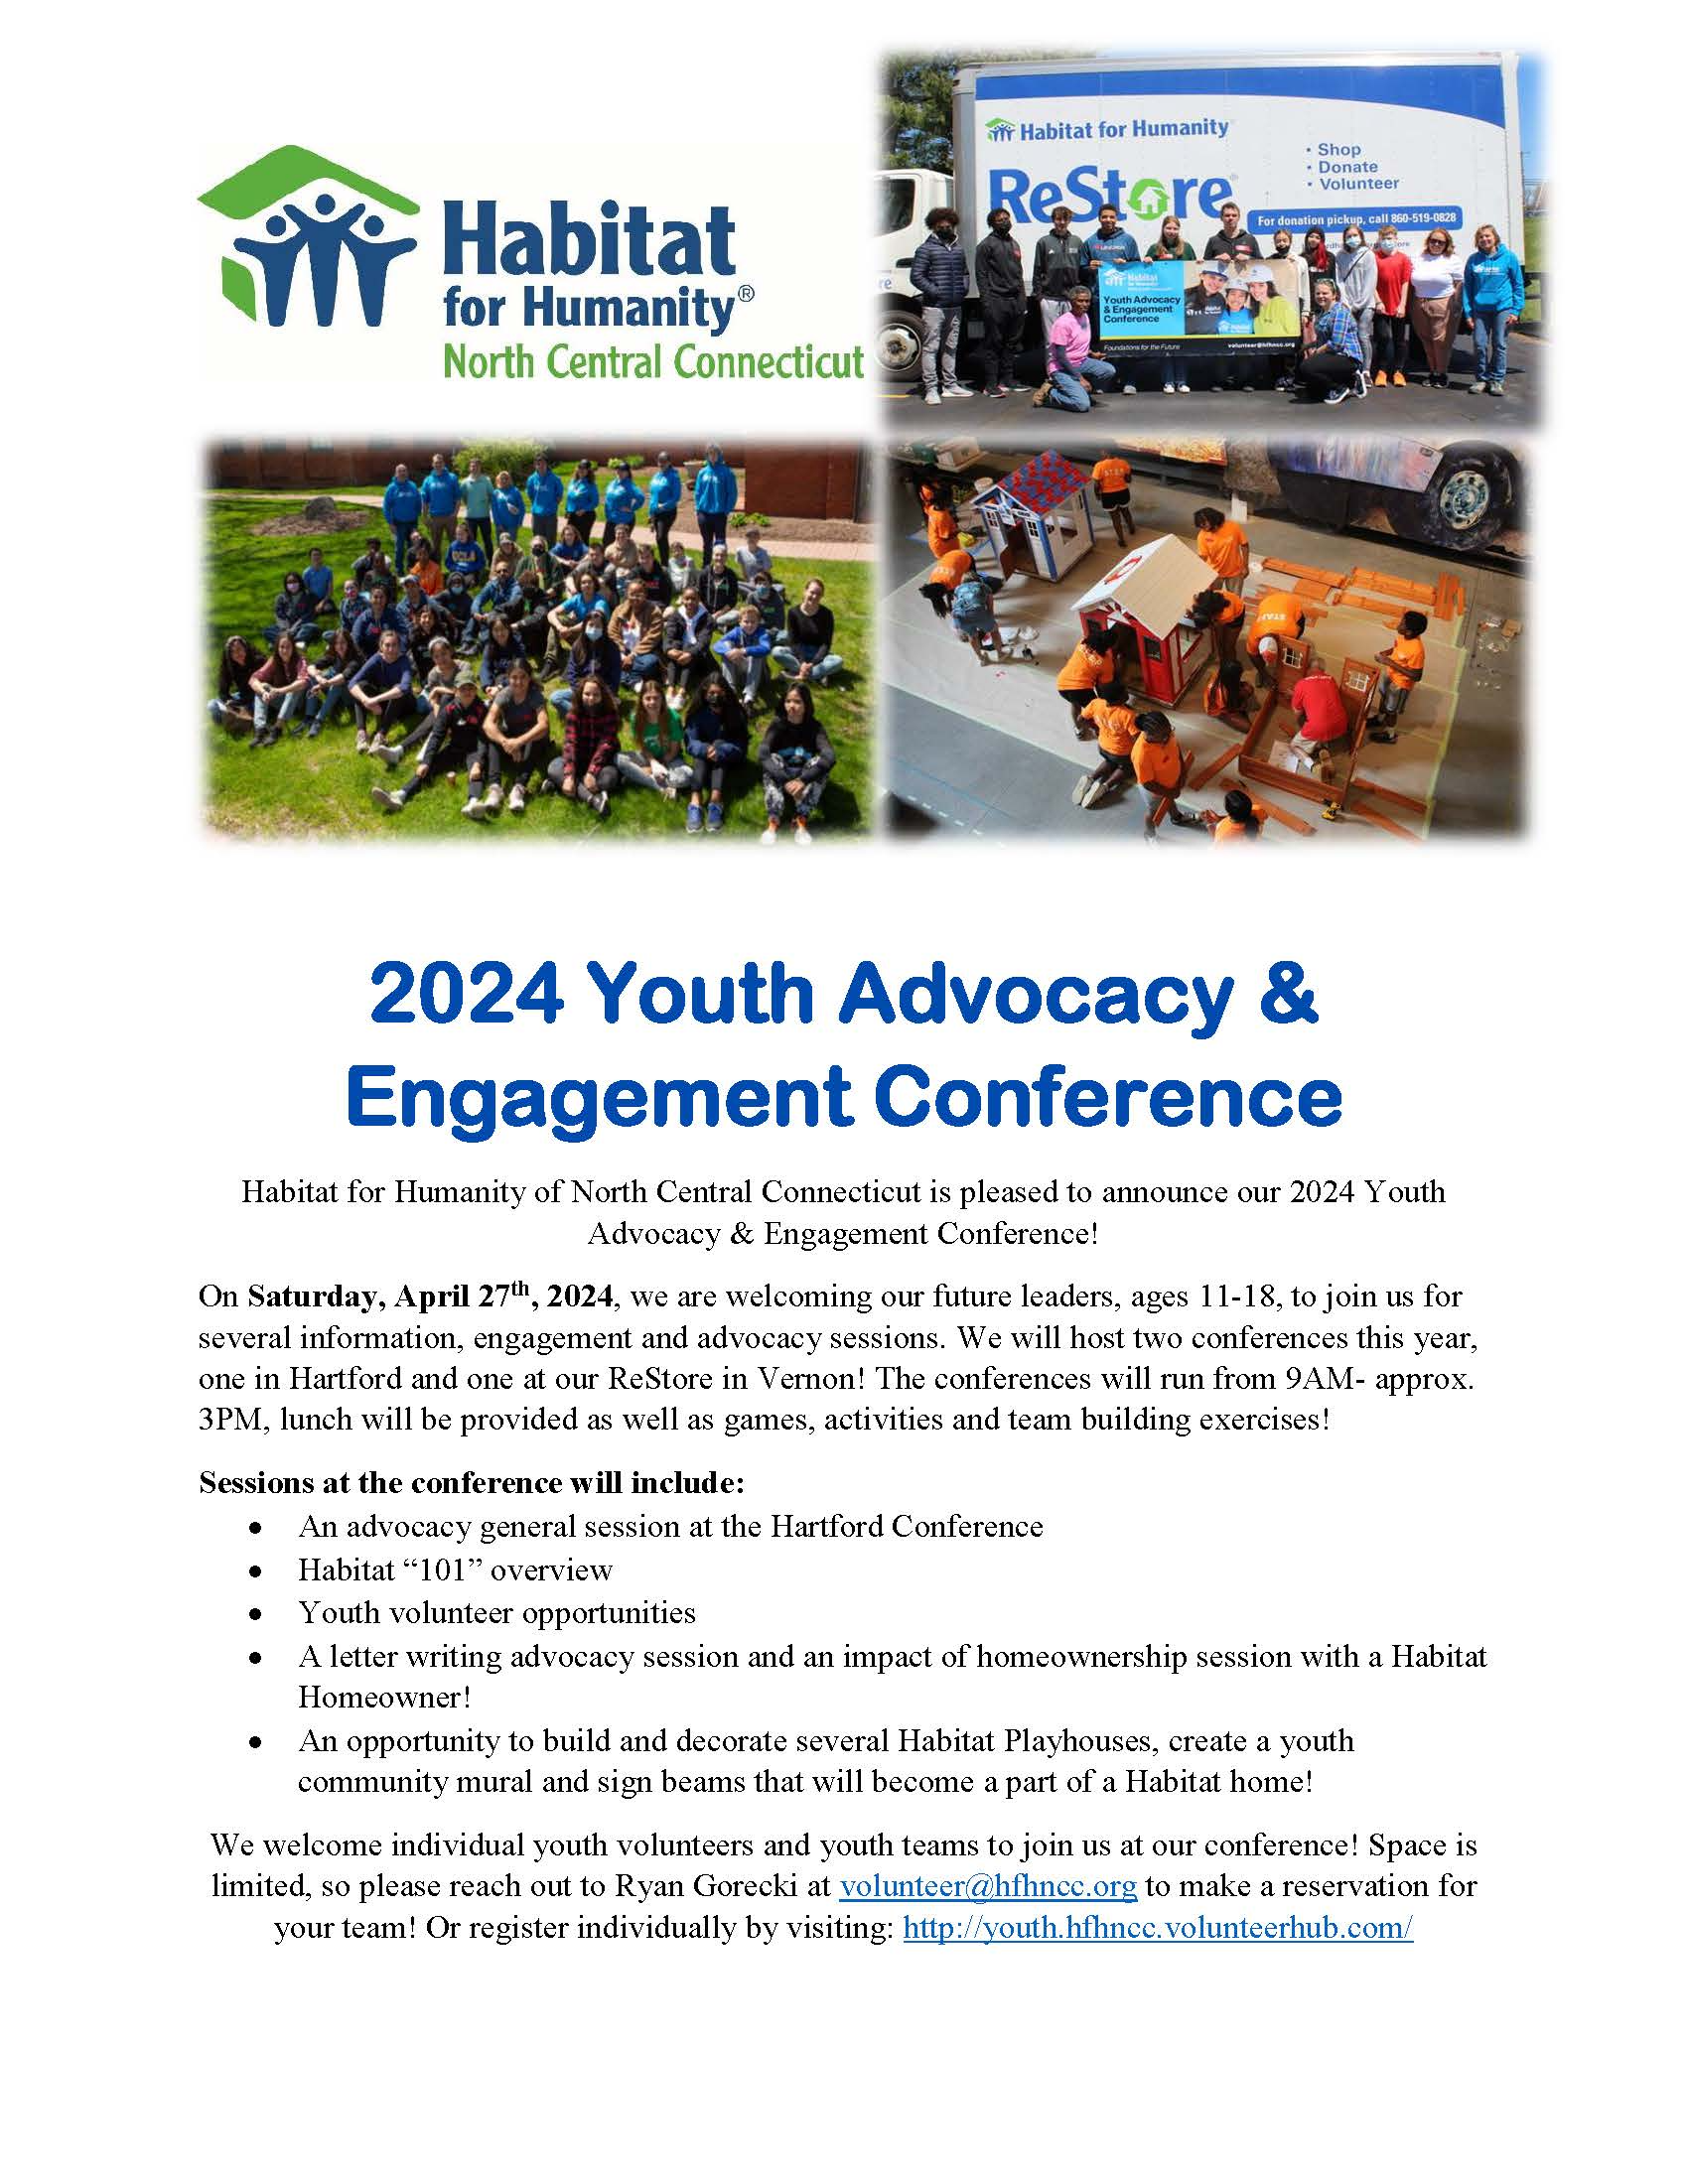 Habitat for Humanity Youth Conference flyer